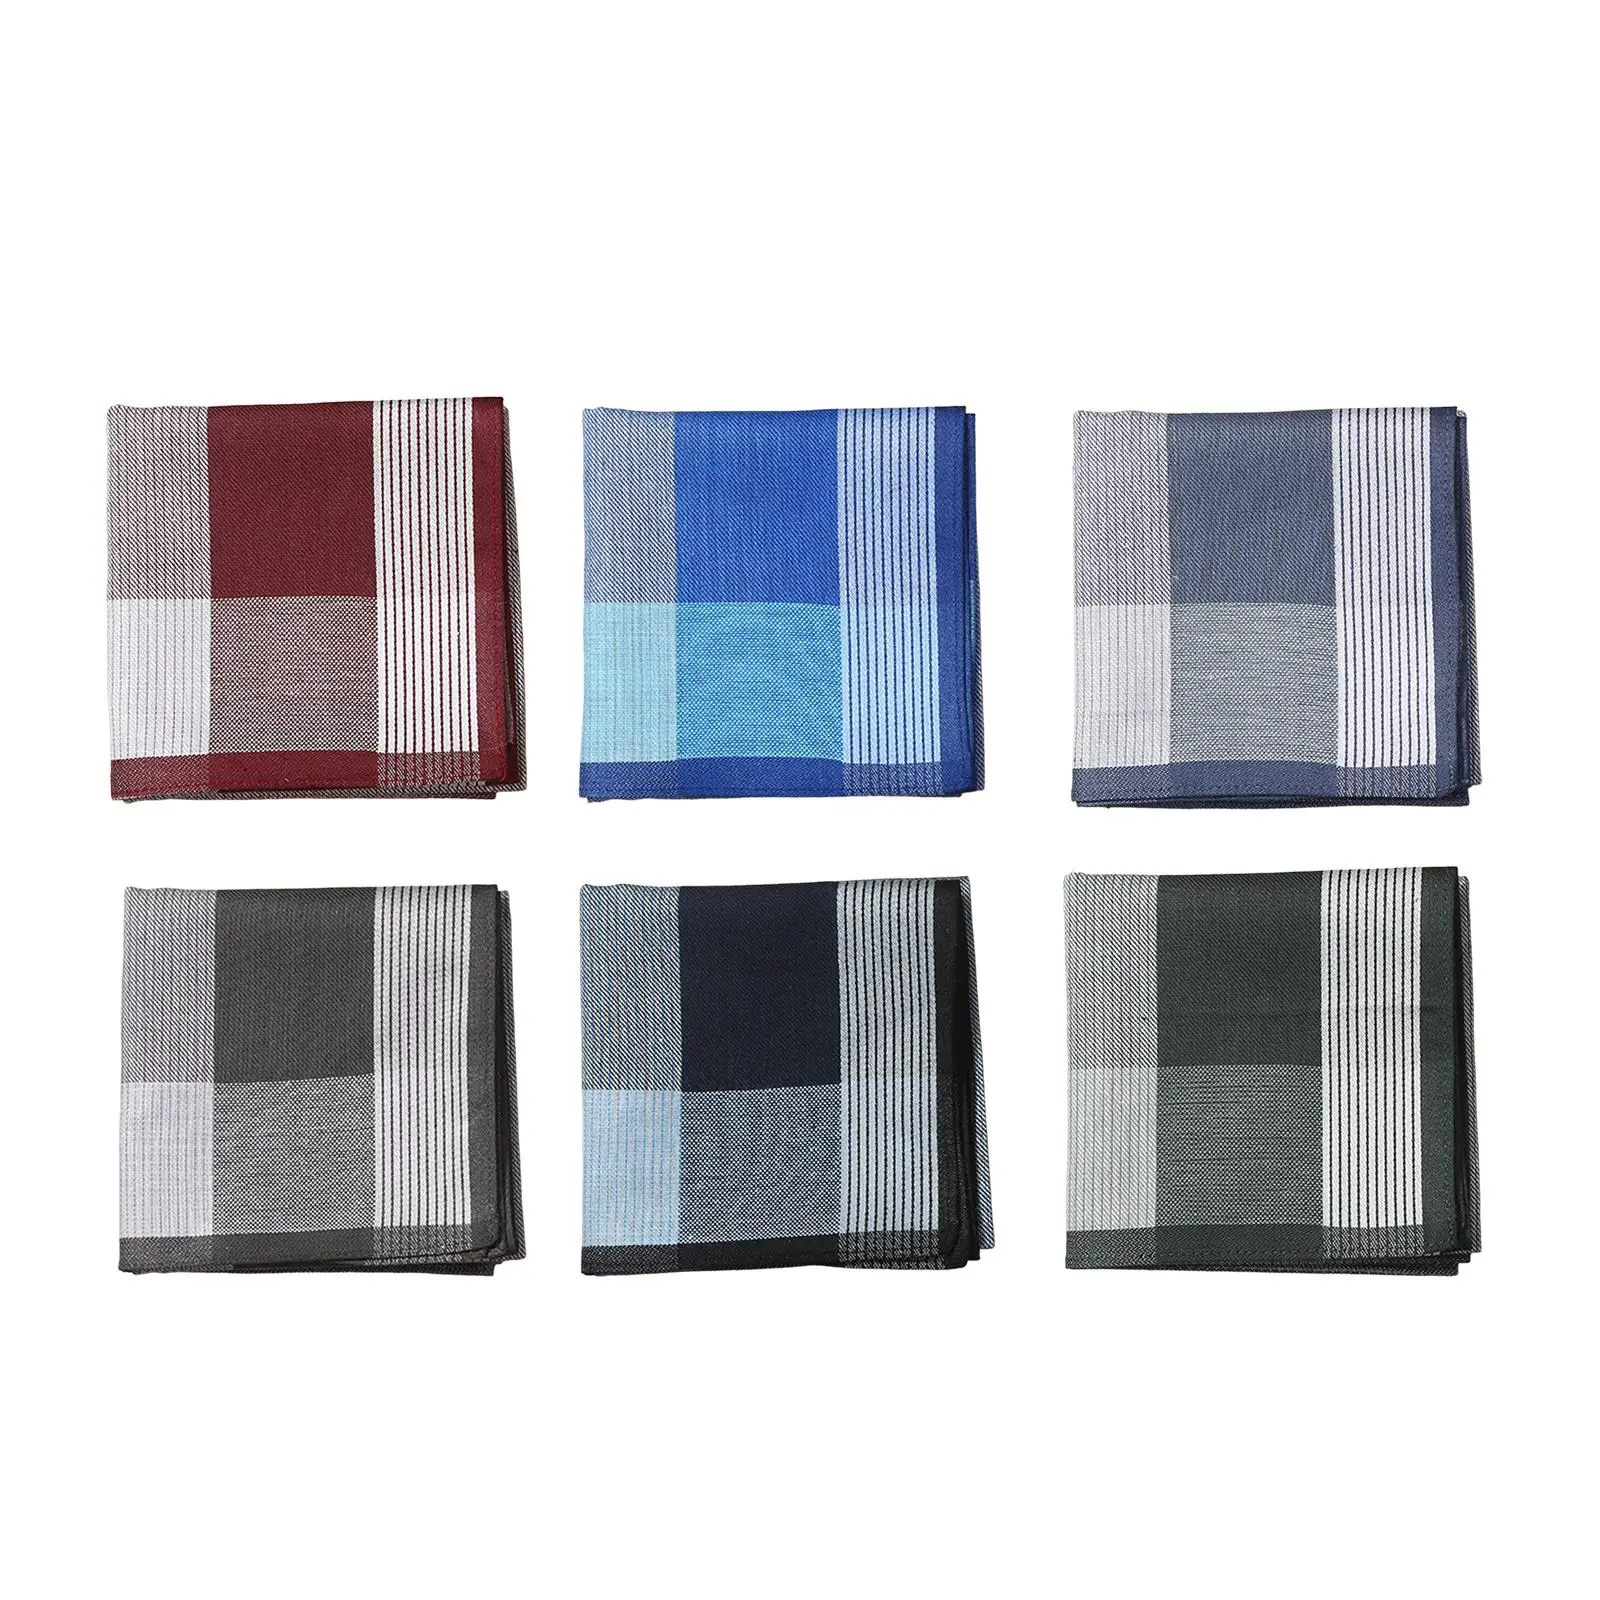 6x Cloth Men`s Handkerchiefs Premium Assorted Color 43x43cm Gifts Pocket Square Hankies for Casual Grooms Father Prom Birthday